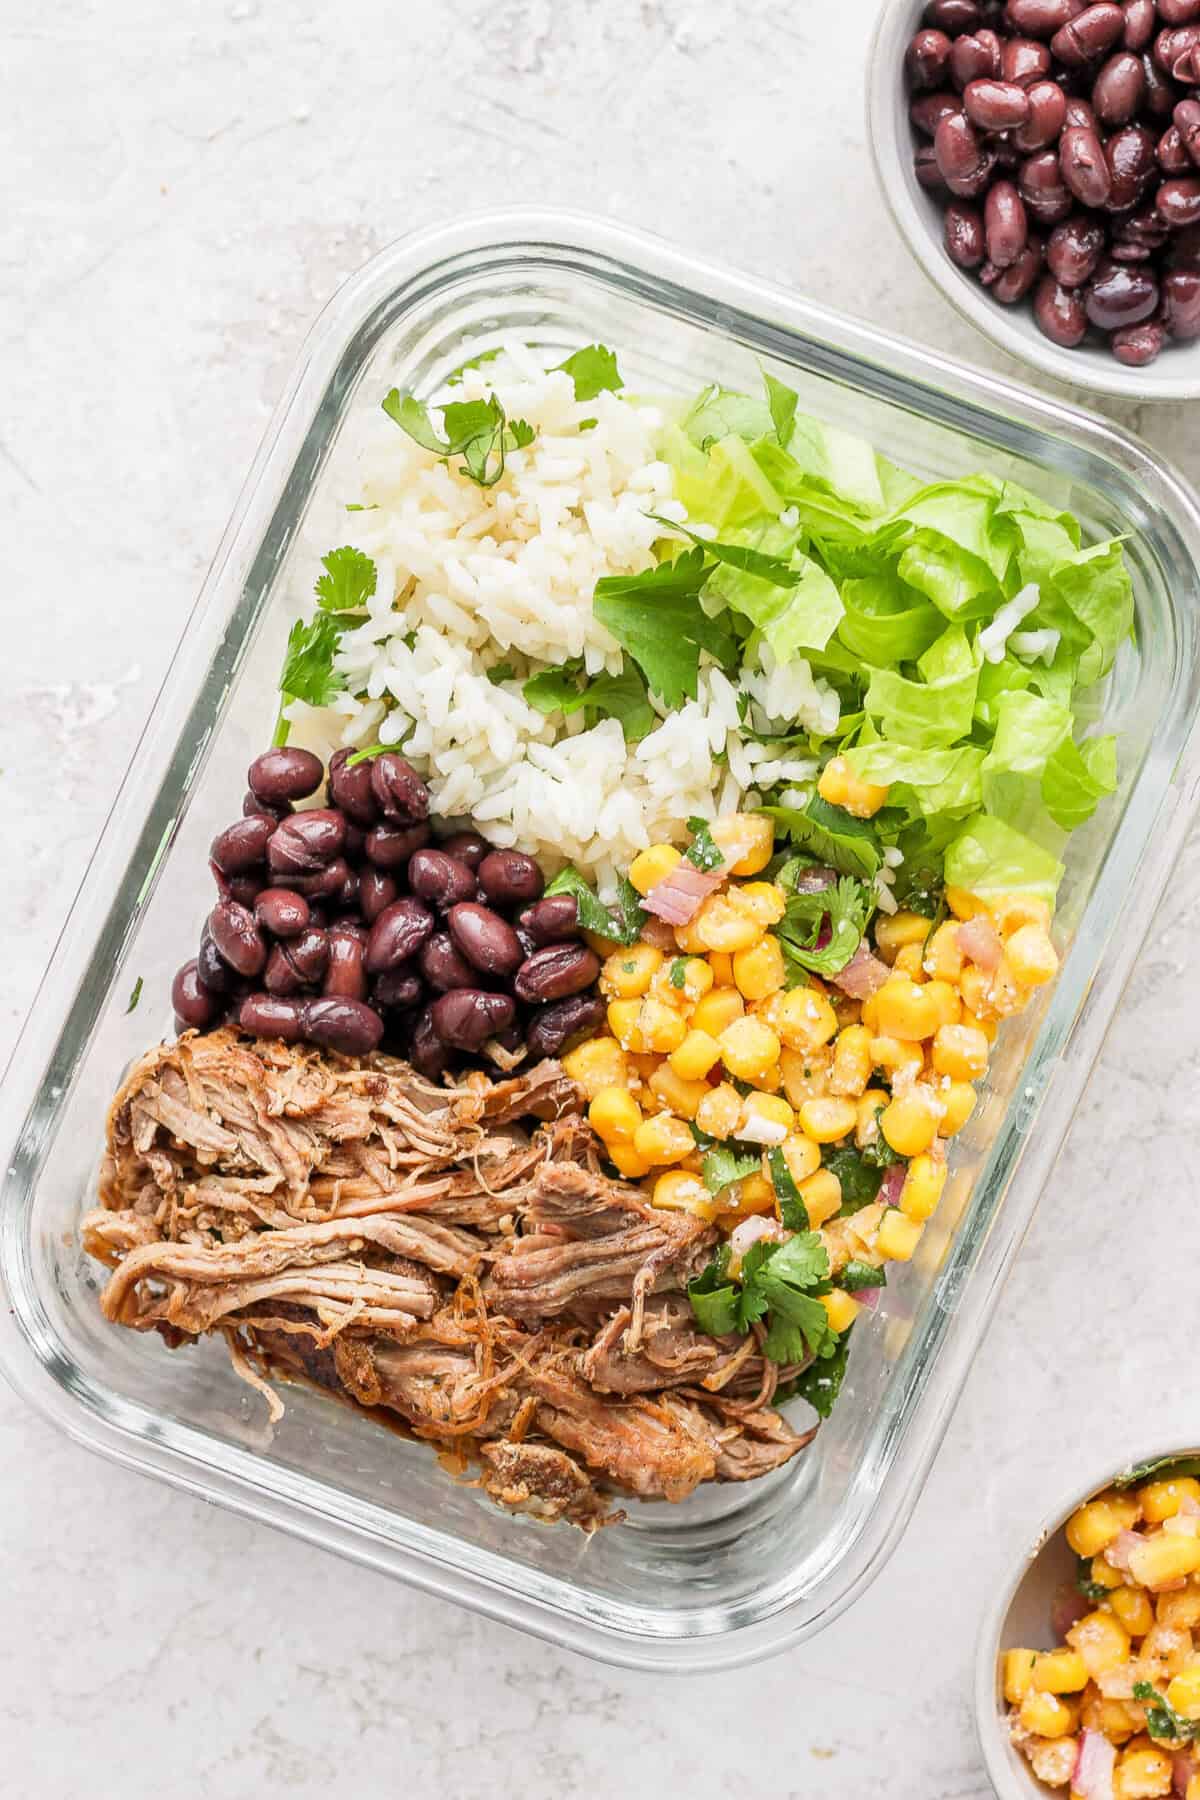 A slow cooker carnitas meal with rice, beans, and corn served in a glass container.